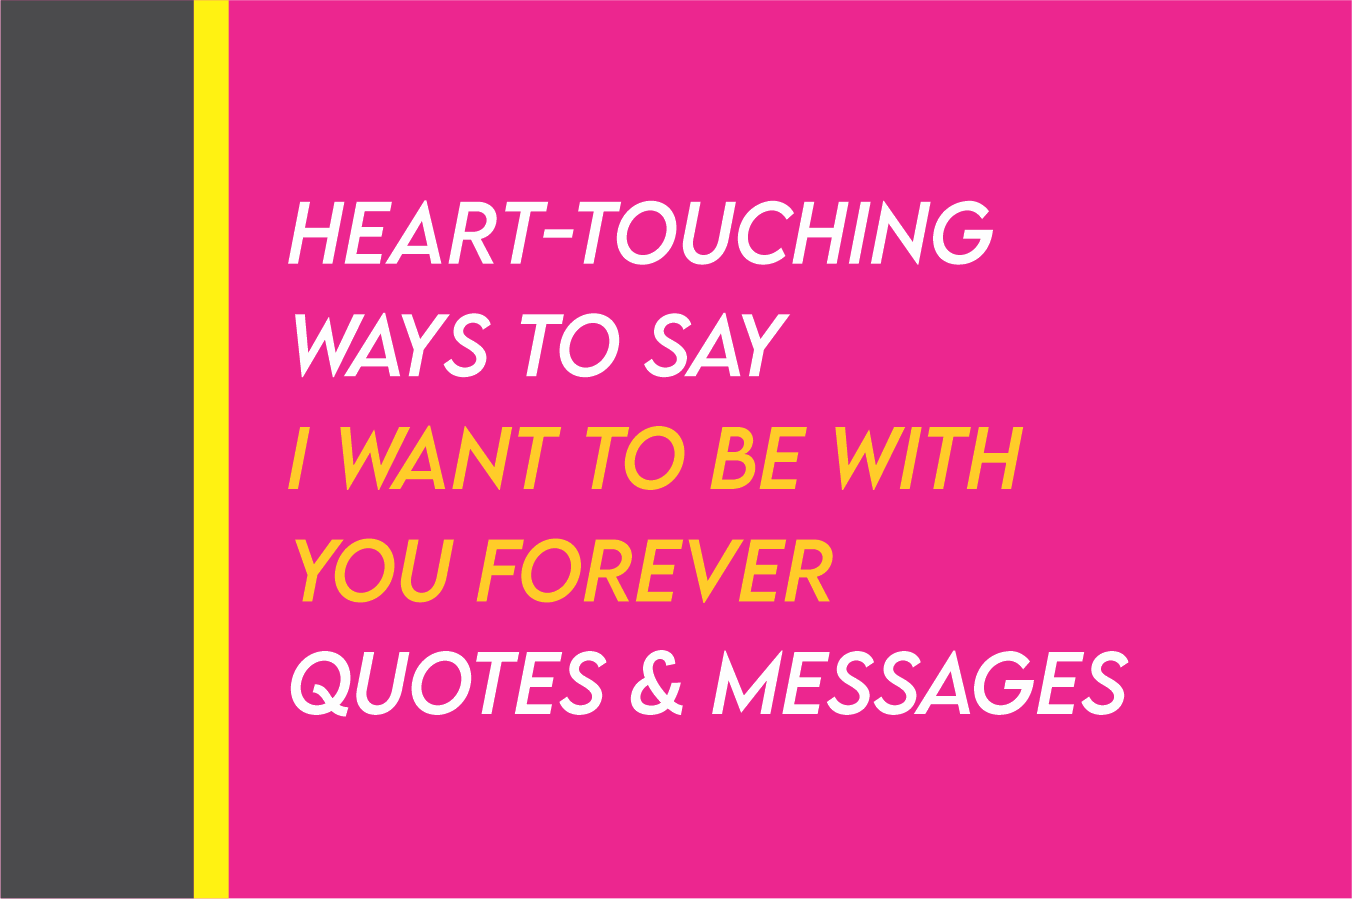 I want to be with you forever quotes